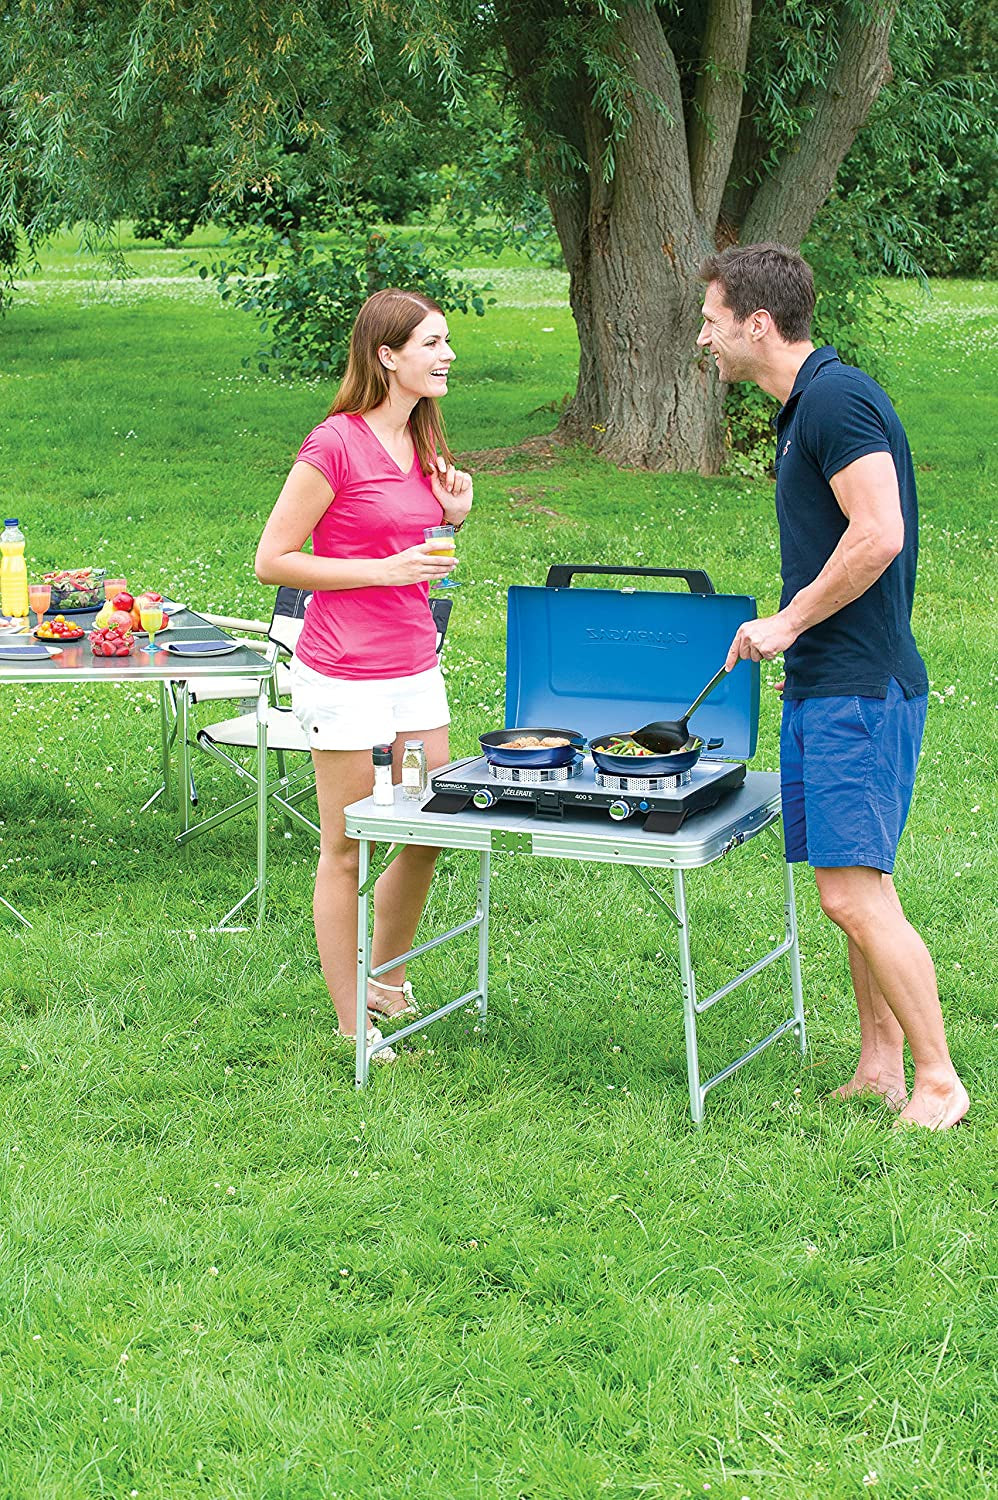 , Portable Two Burner Gas Cooker with Windshield, 4400 Watt